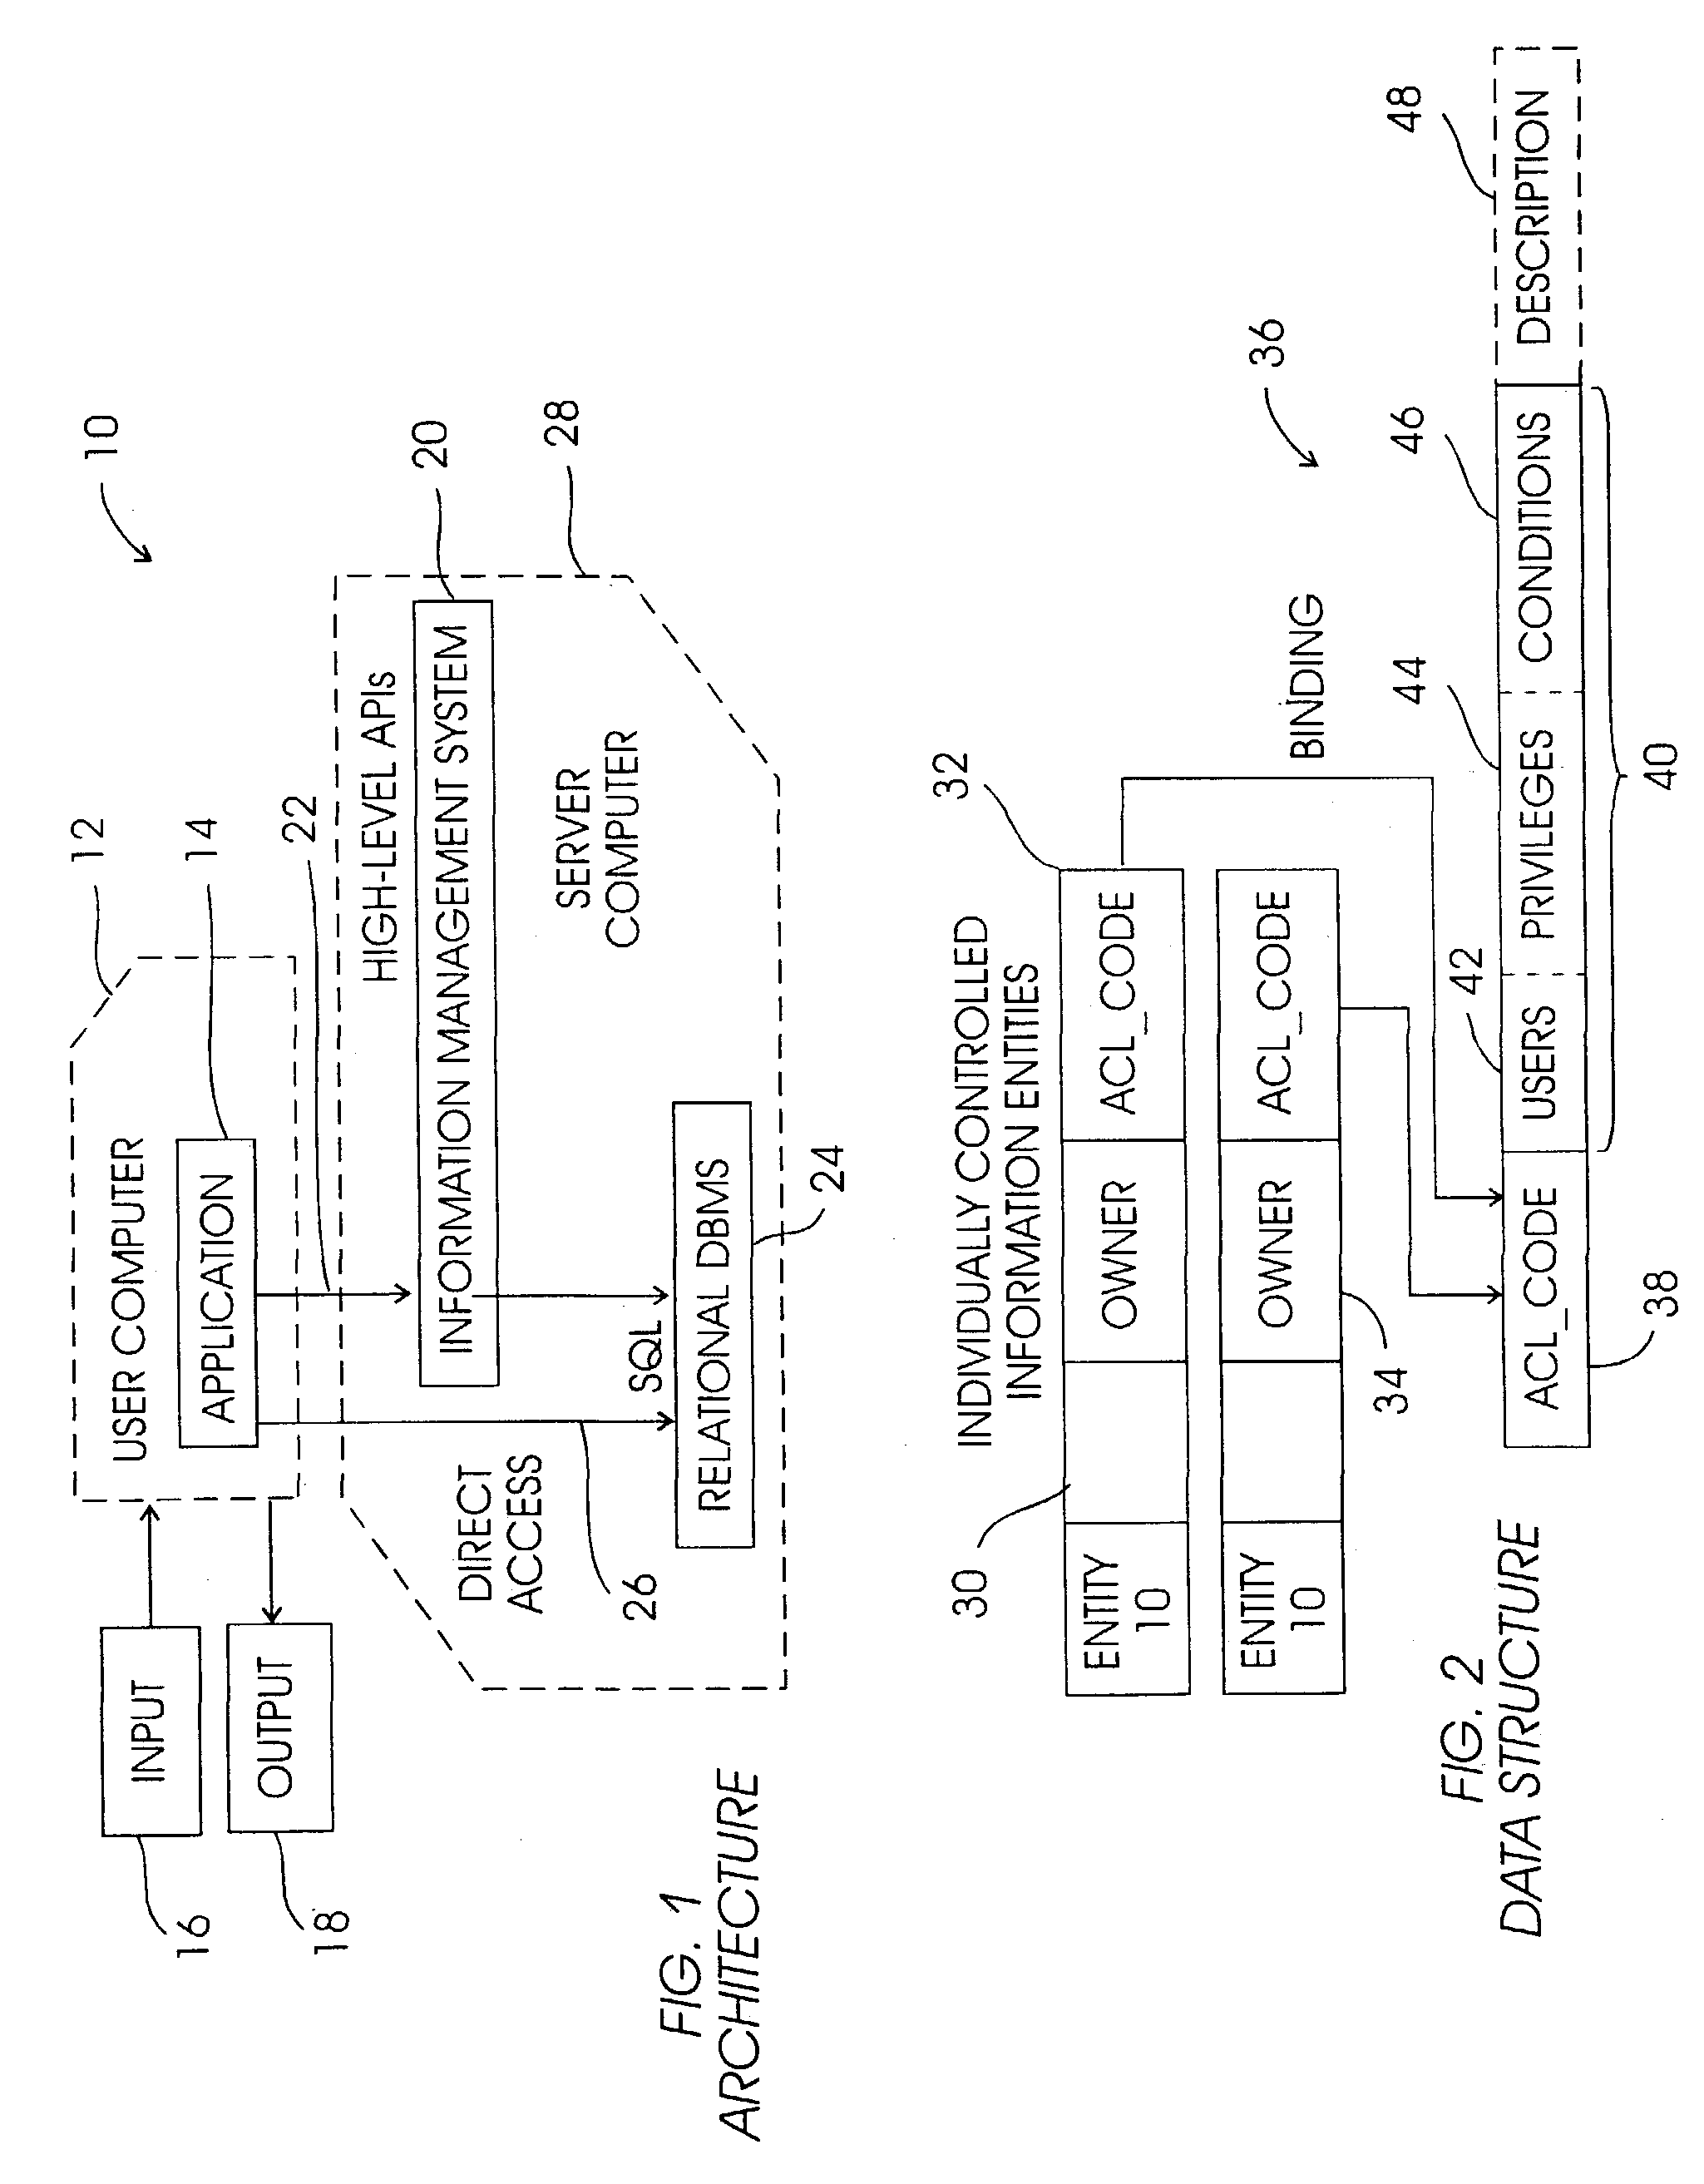 System and method for RDBMS to protect records in accordance with non-RDBMS access control rules